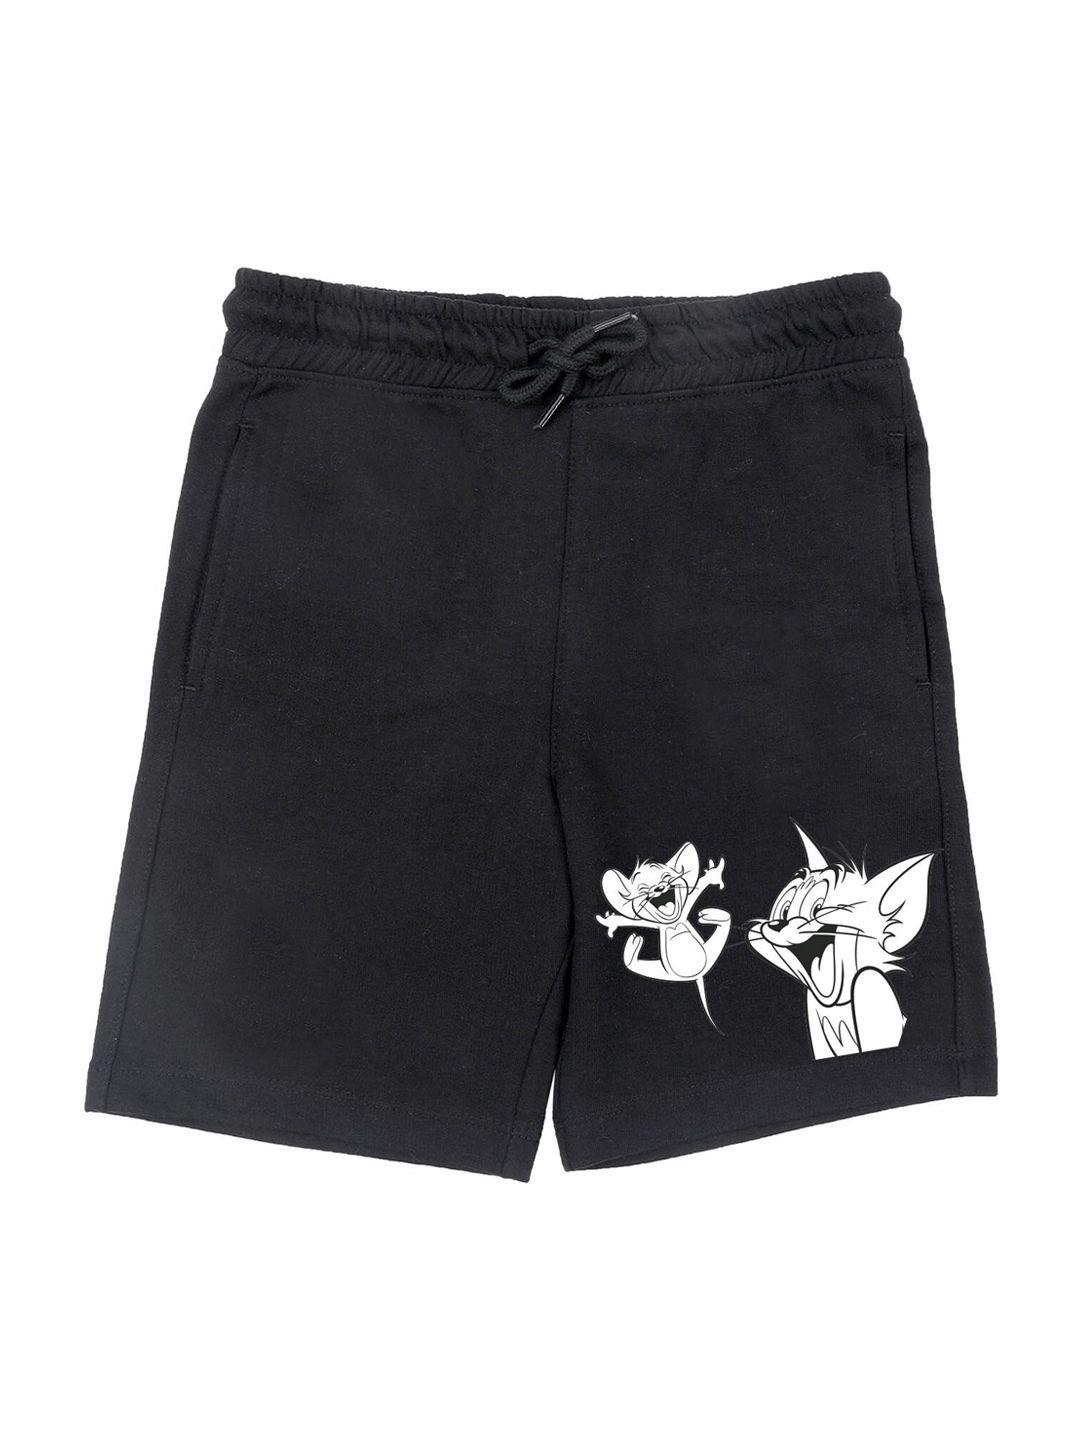 tom & jerry by wear your mind boys black & white tom & jerry printed shorts